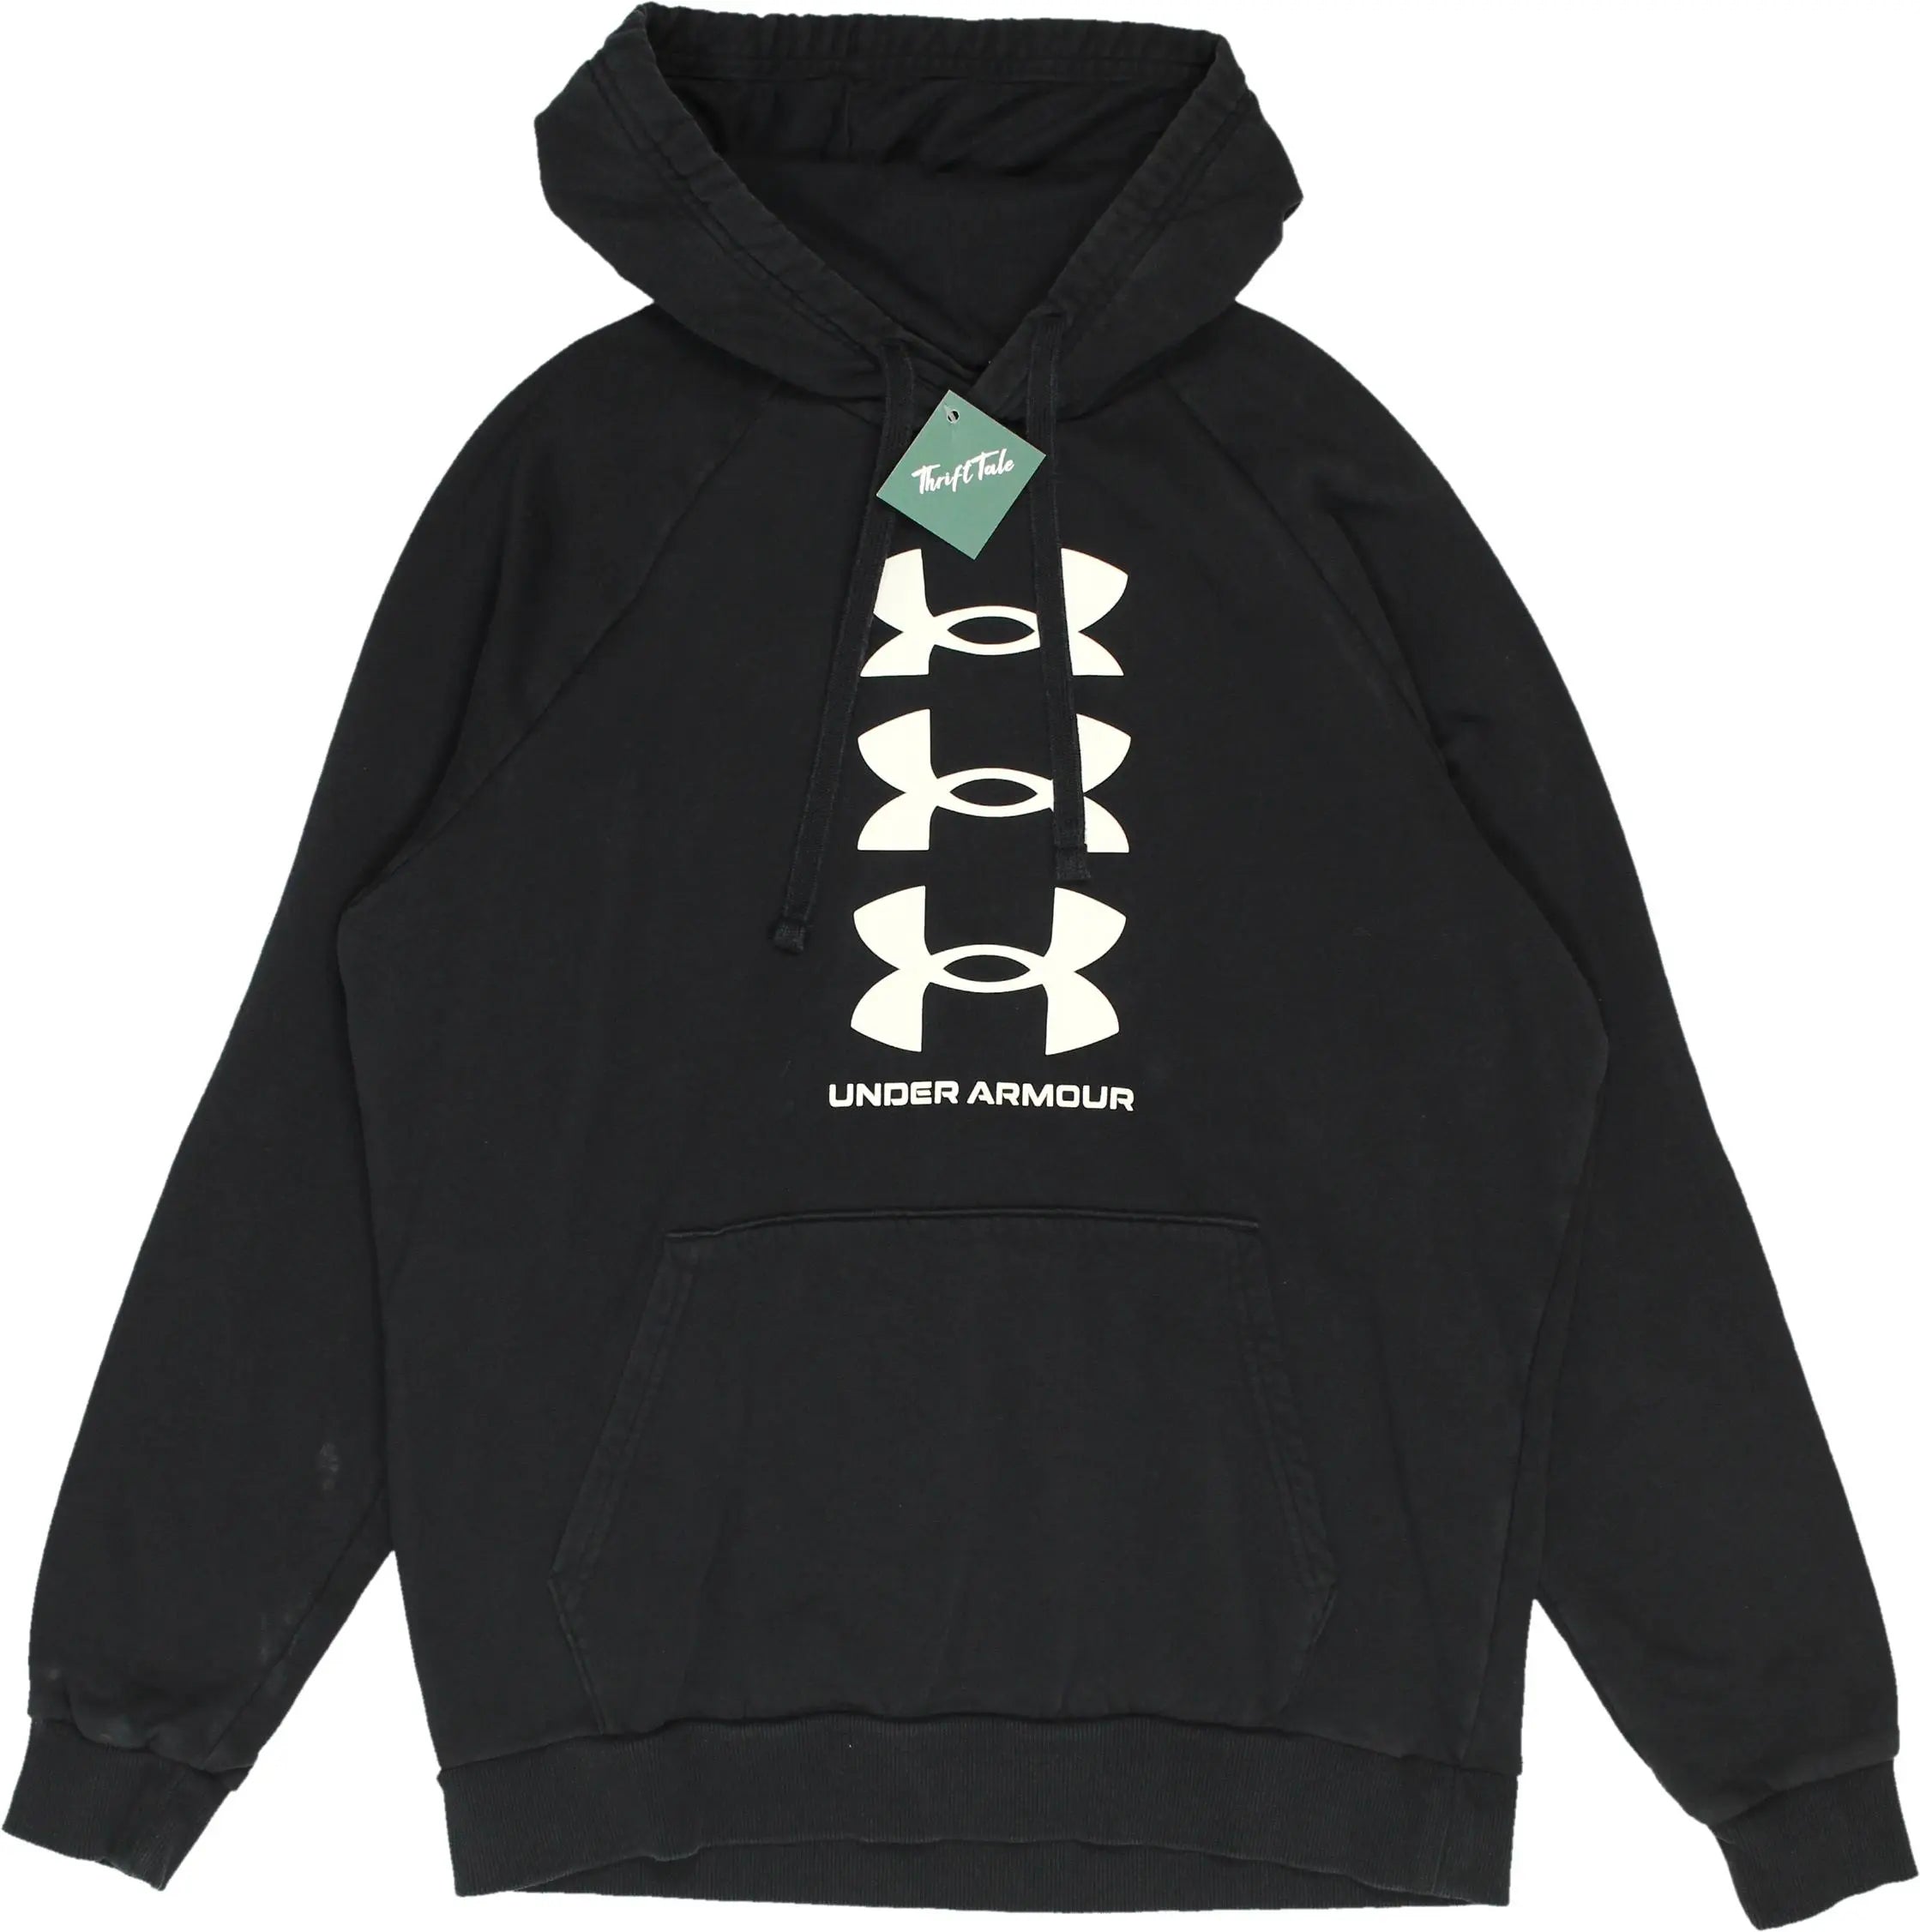 Under Armour - Black Hoodie by Under Armour- ThriftTale.com - Vintage and second handclothing